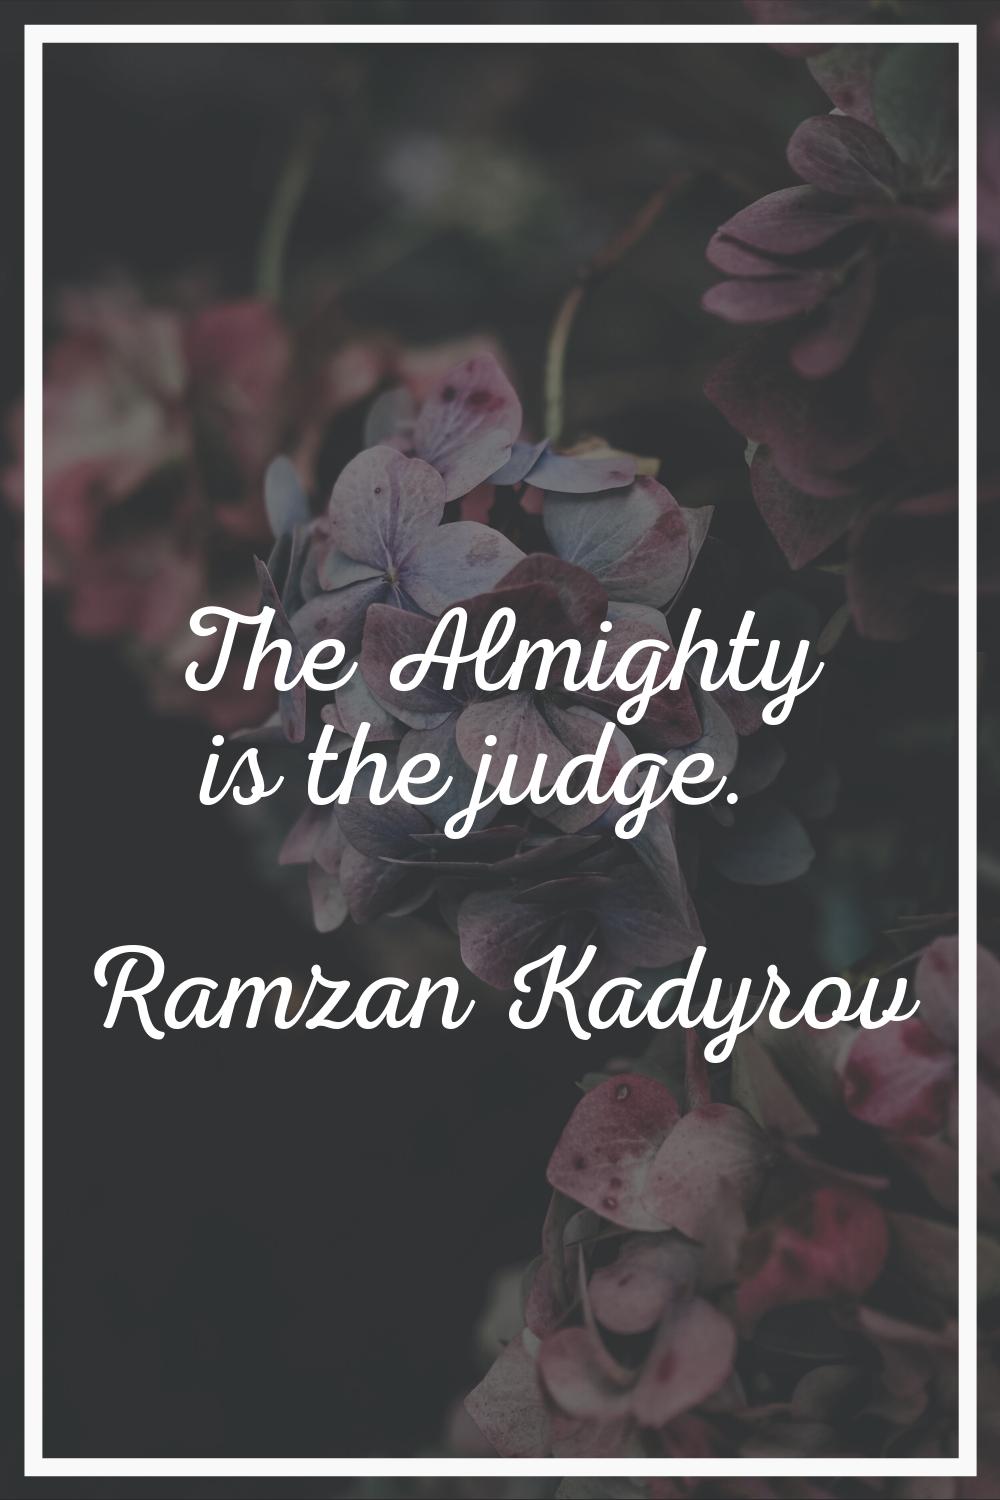 The Almighty is the judge.